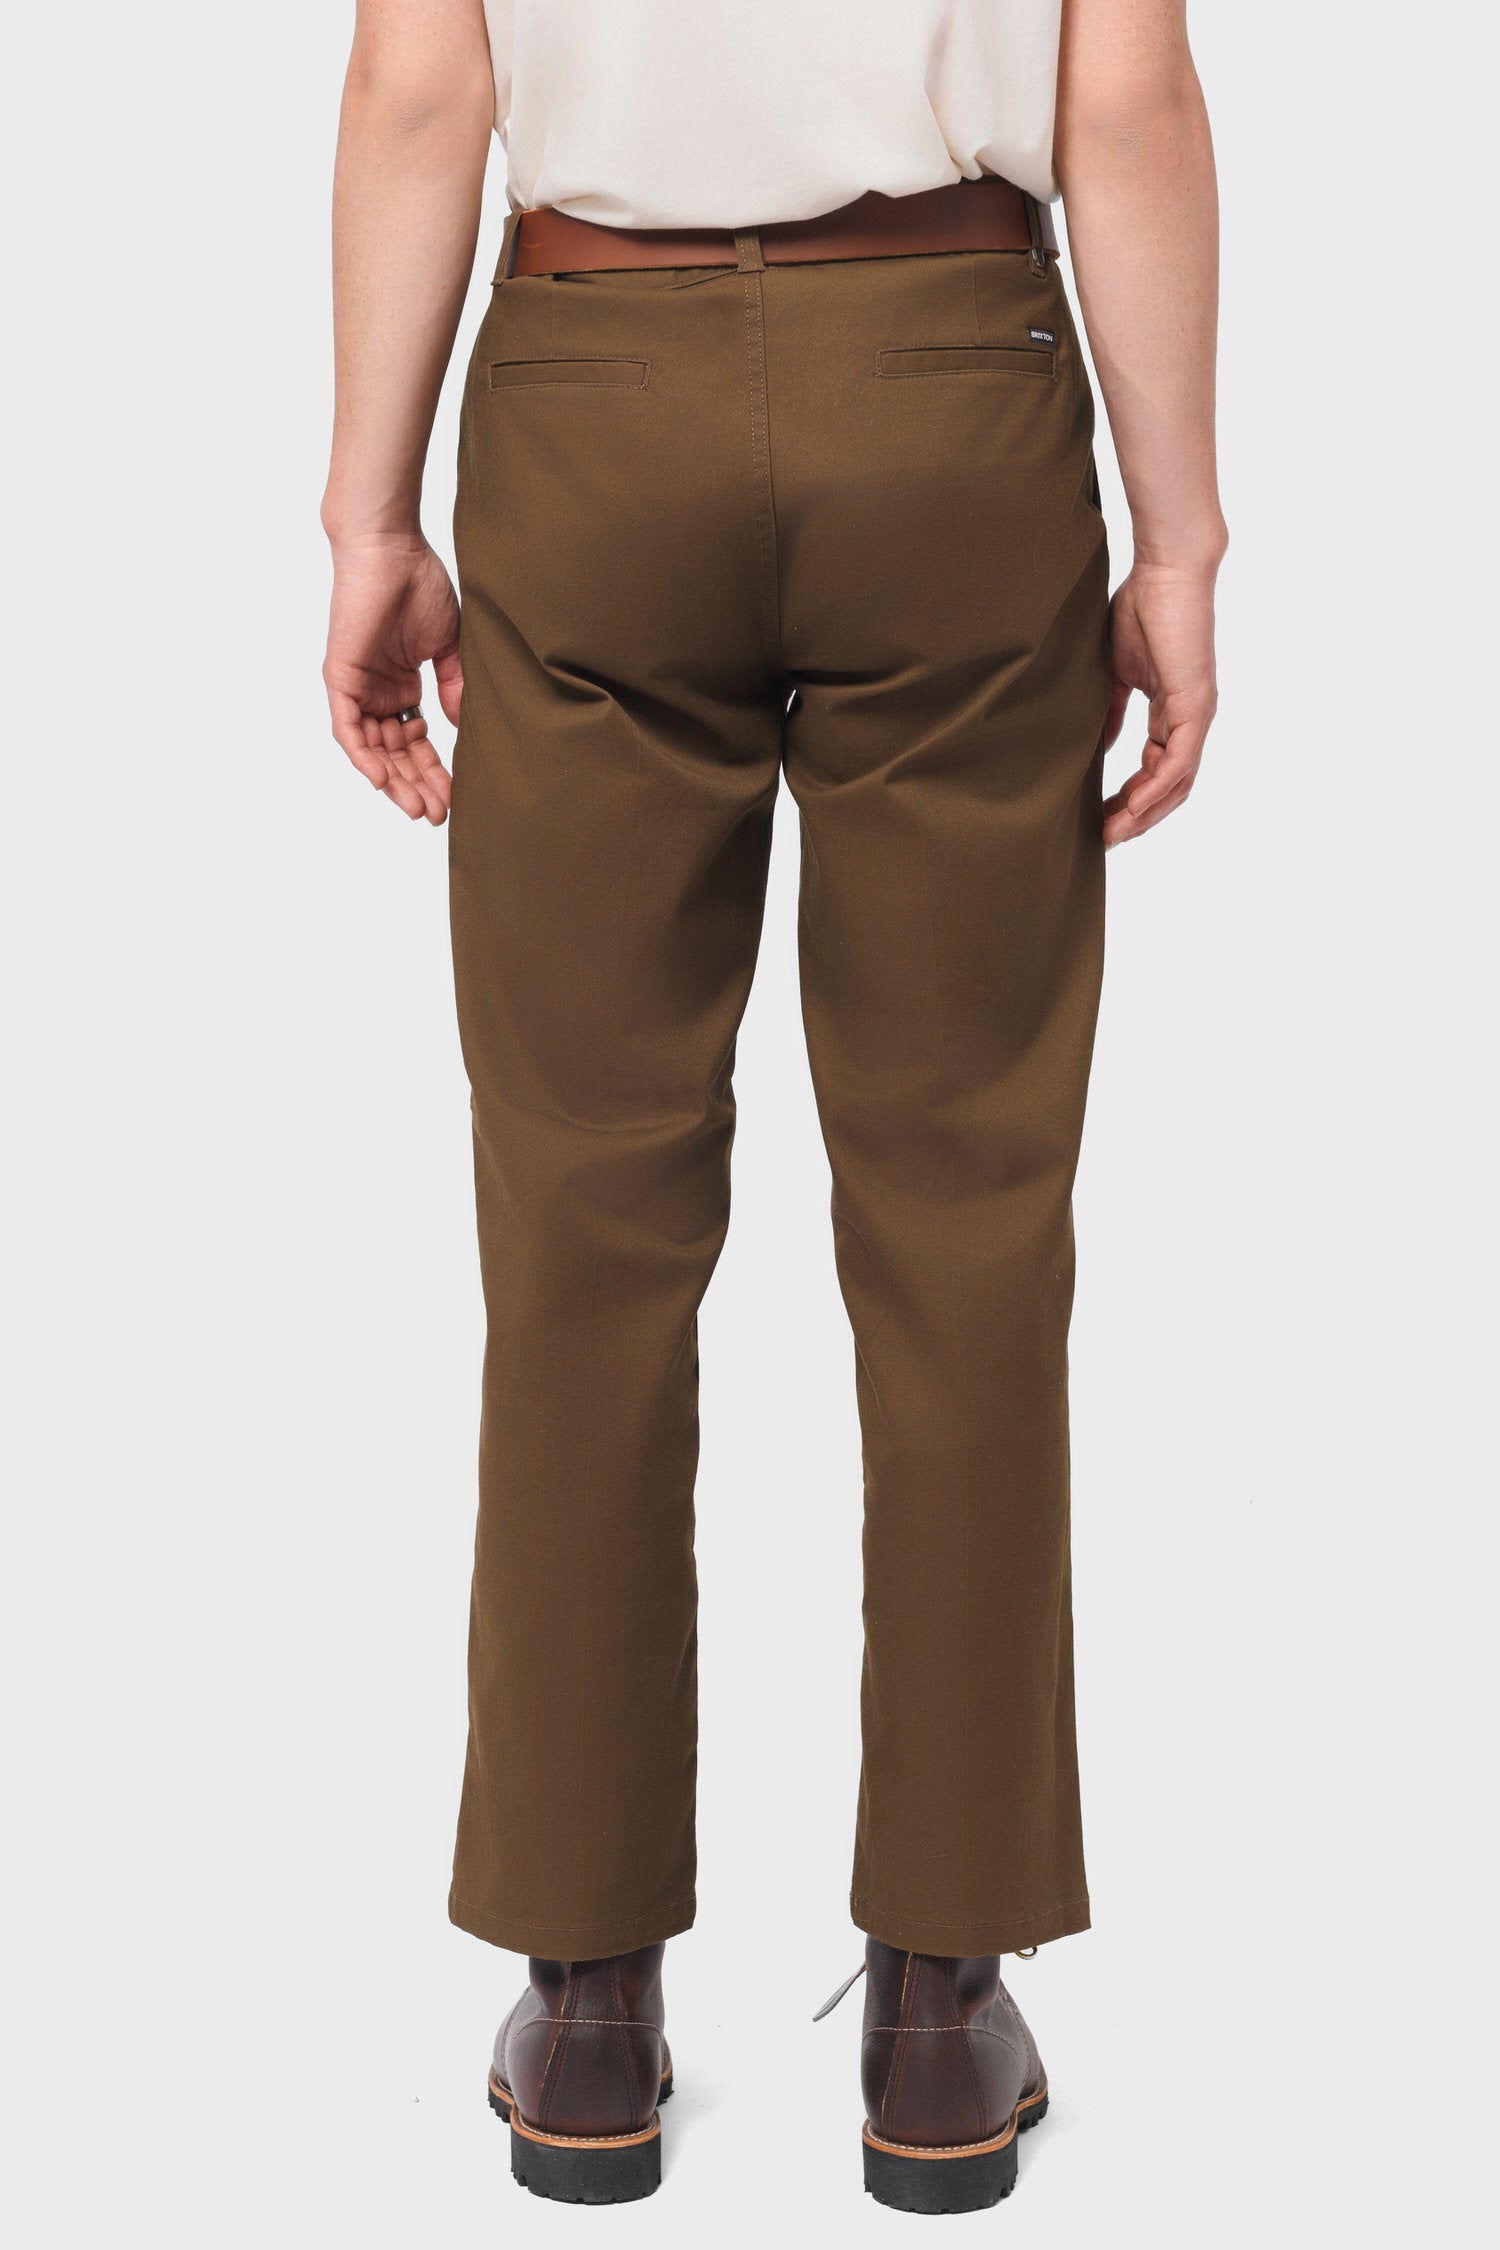 Men's Brixton Choice Chino Relaxed Pant in Desert Palm